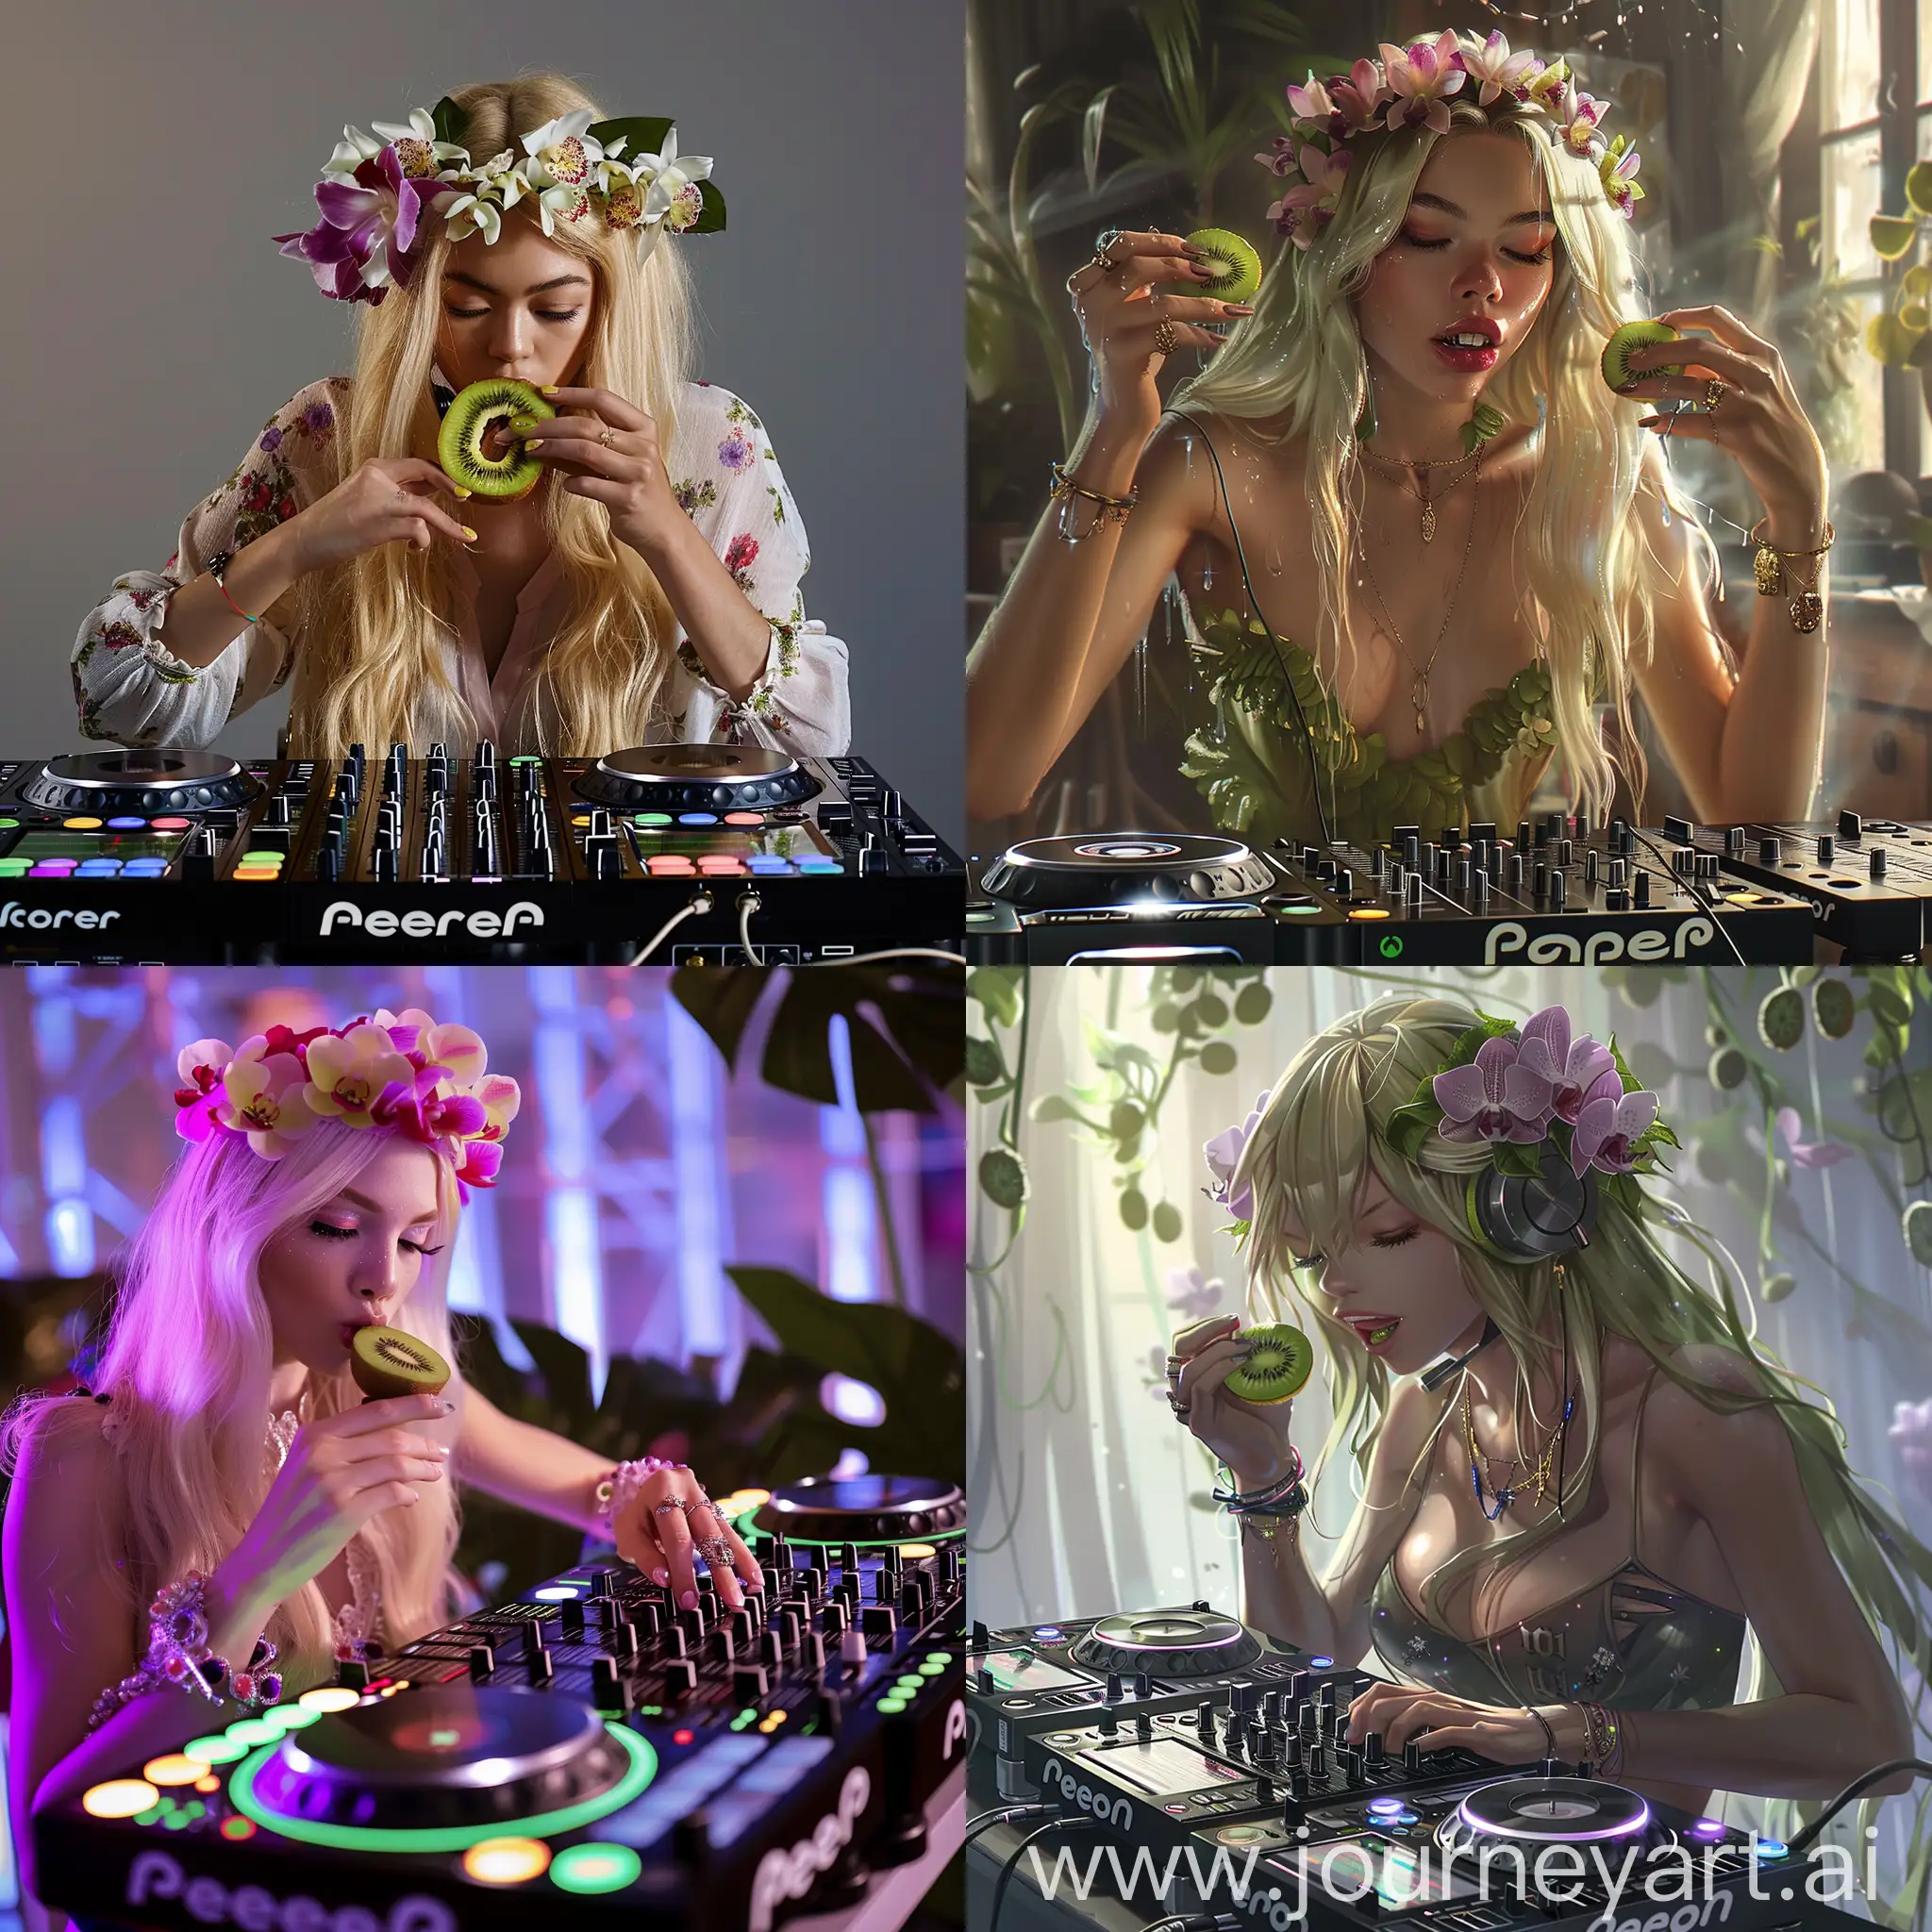 Blonde DJ girl with orchids in her hair eats kiwi and plays music on the DJ console